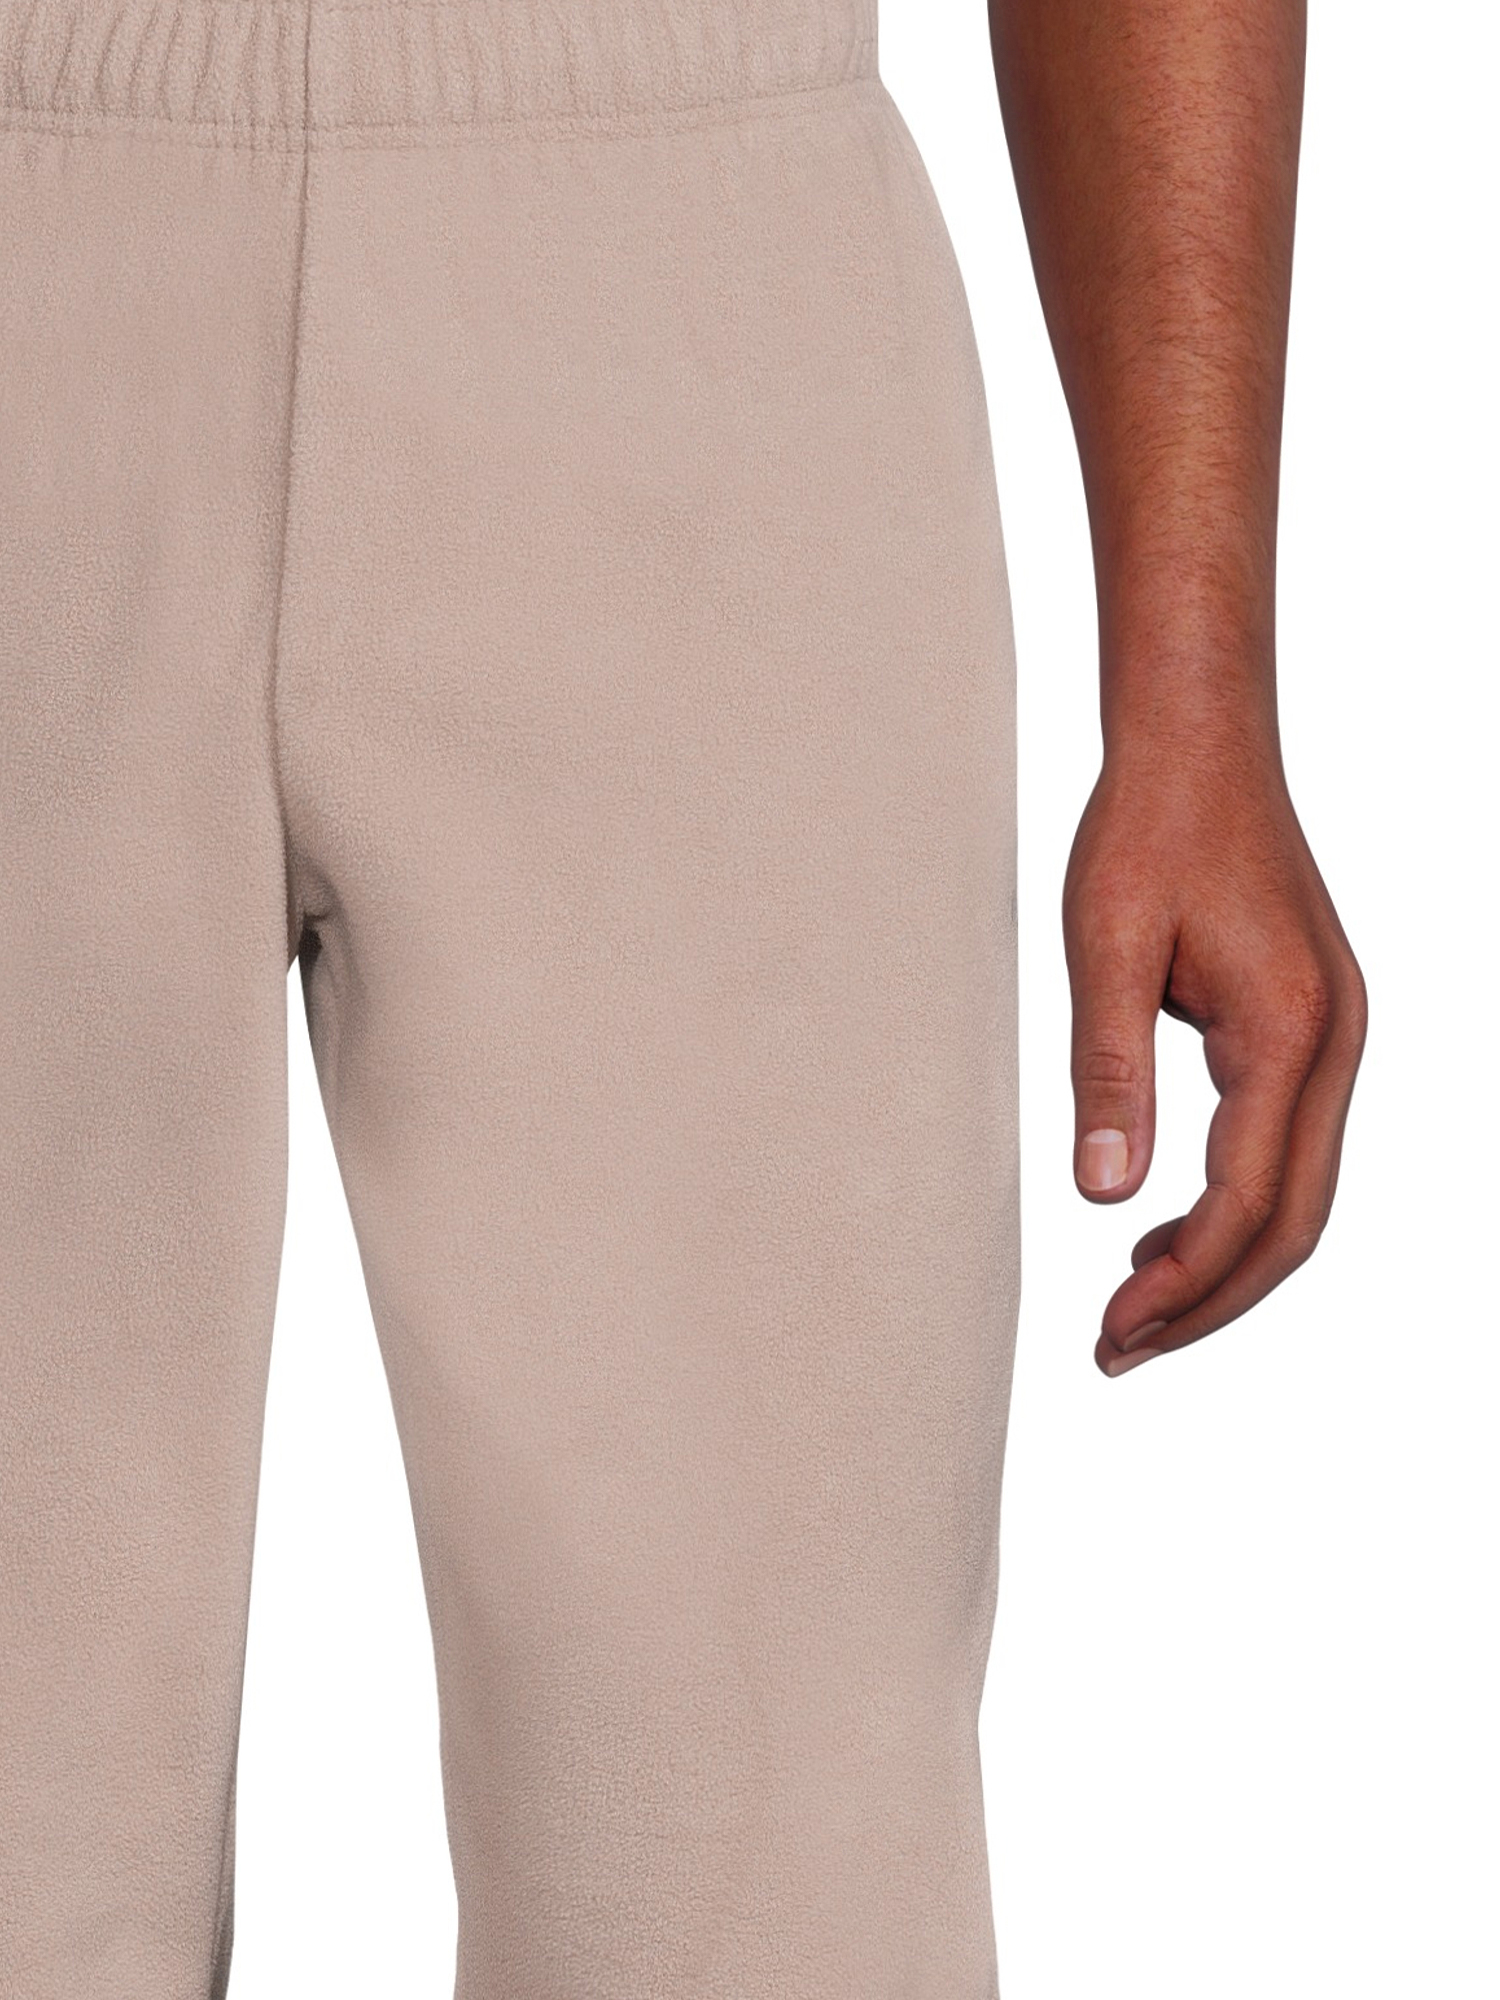 Russell Men's and Big Men's Microfleece Jogger Pants, Sizes S-3XL - image 4 of 5